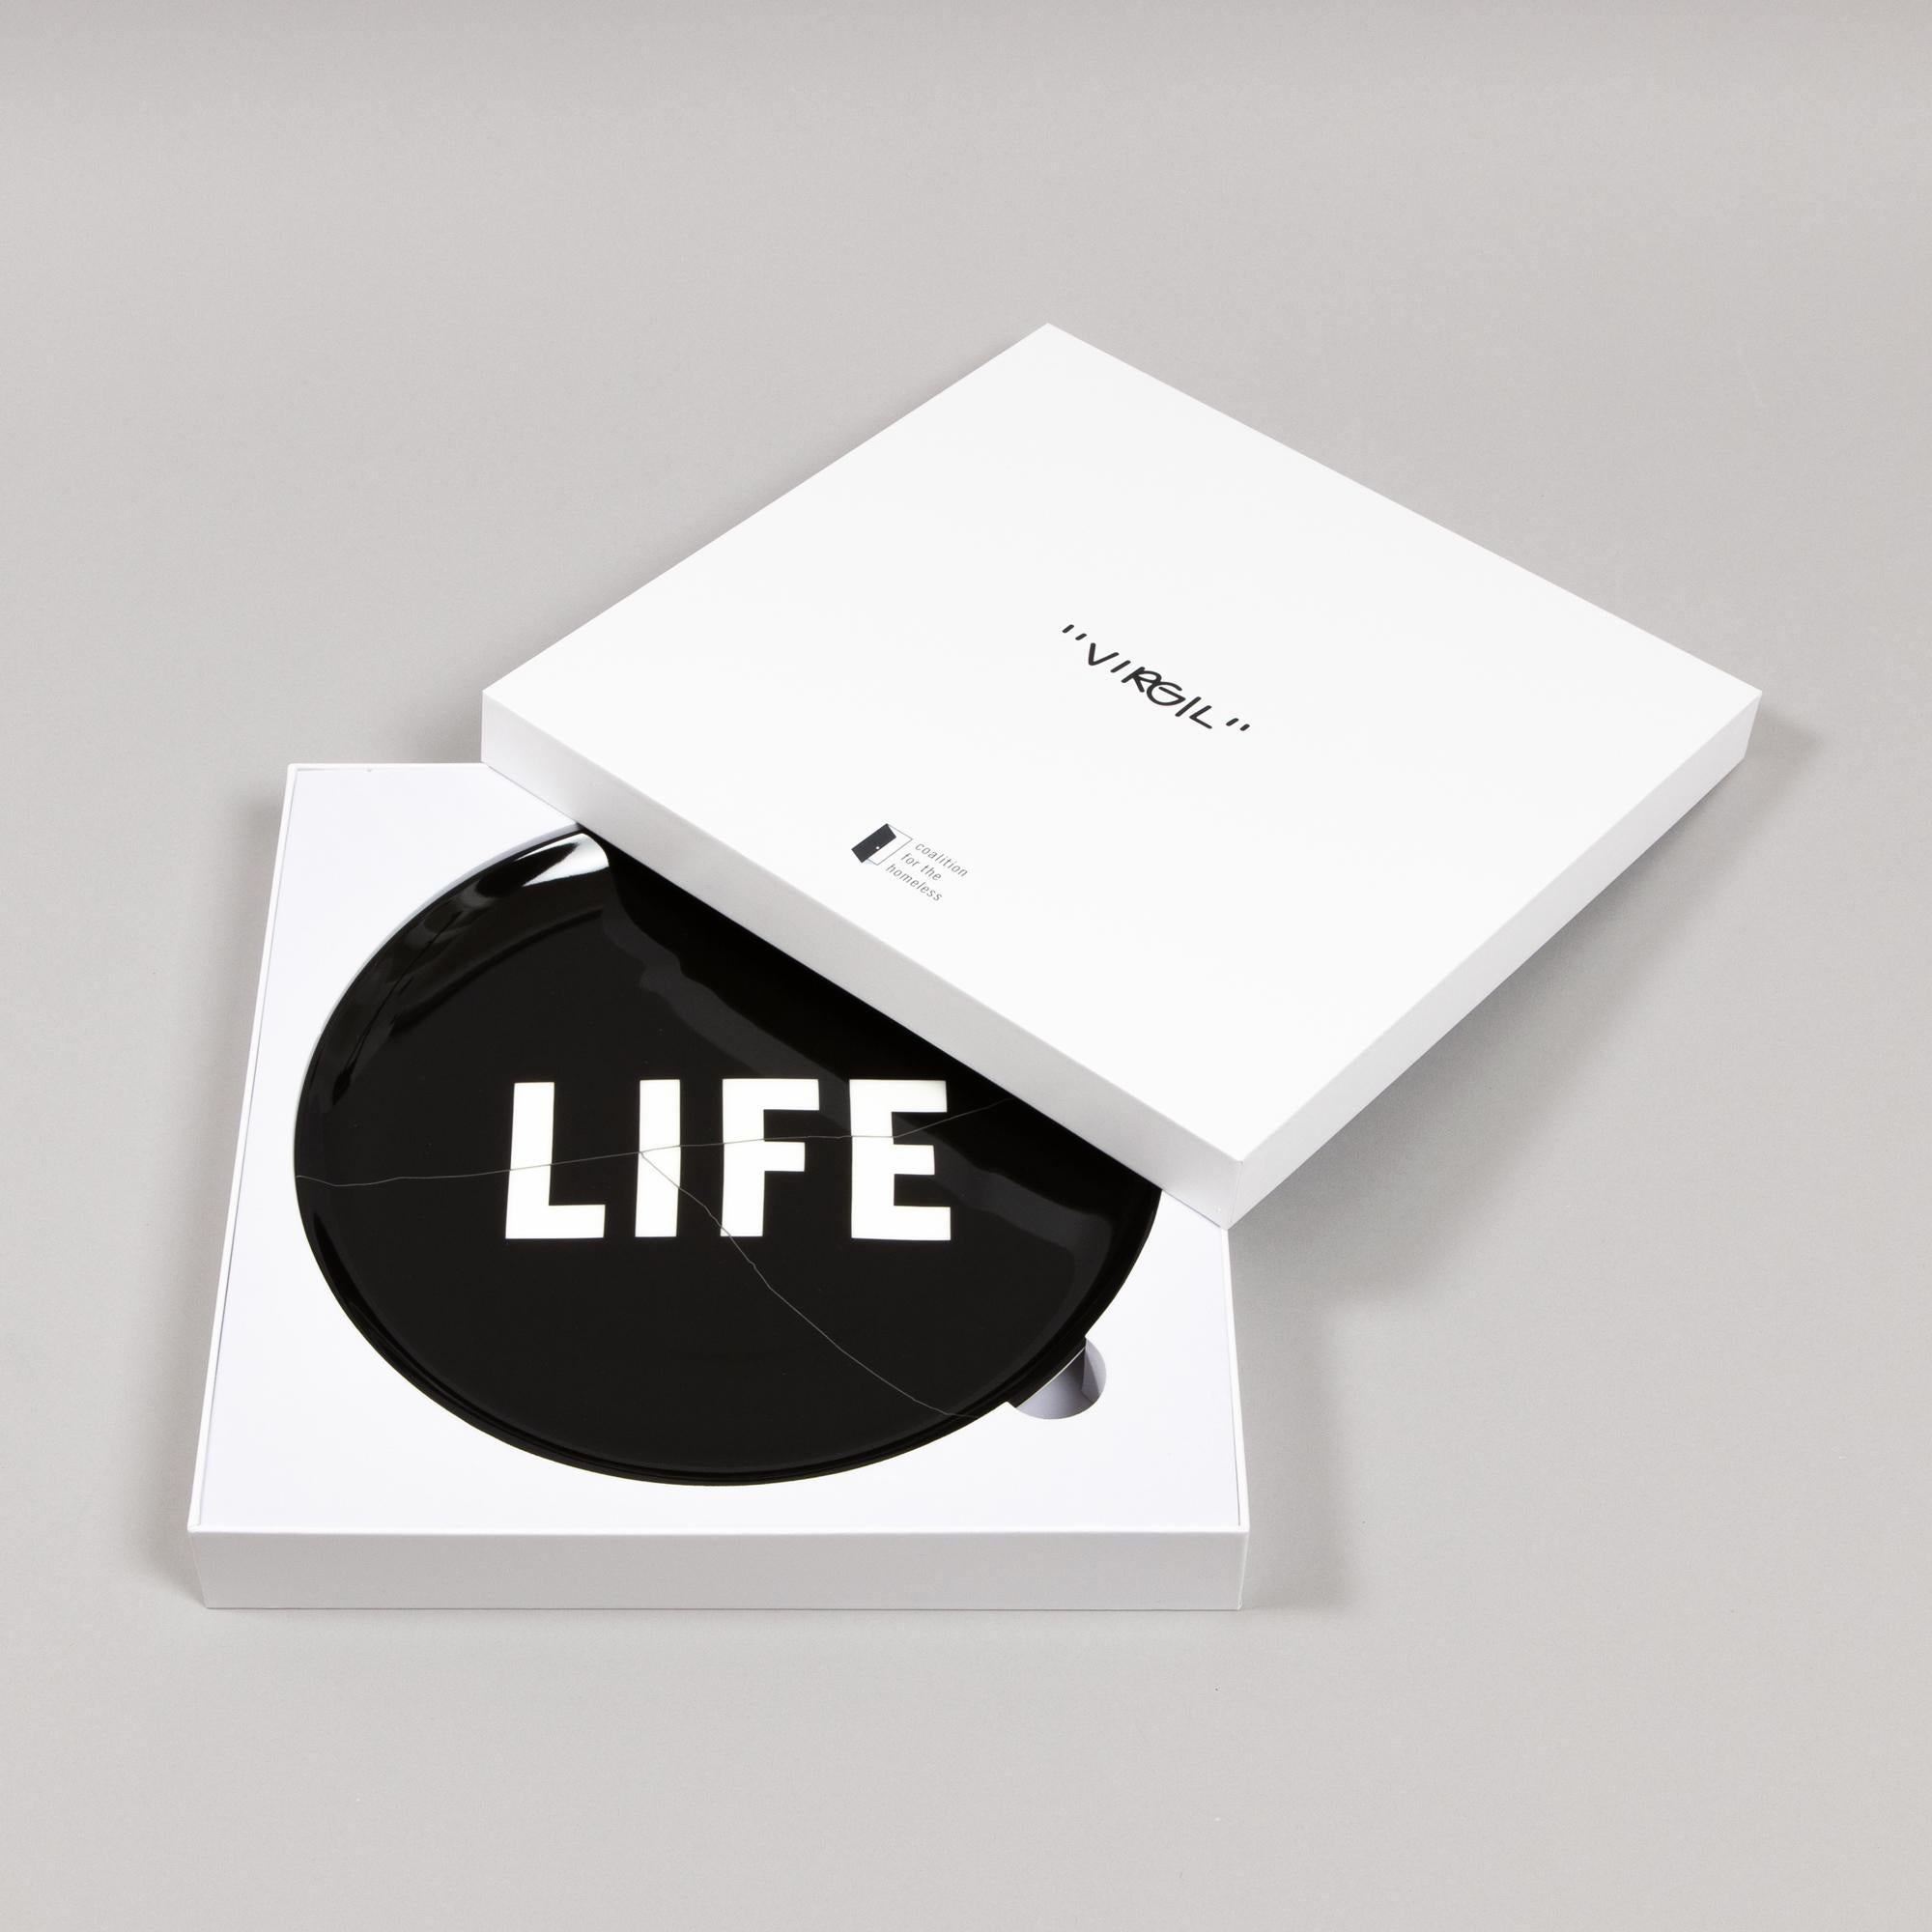 Virgil Abloh, Life Itself - Limited Edition Plate, Contemporary Art 1